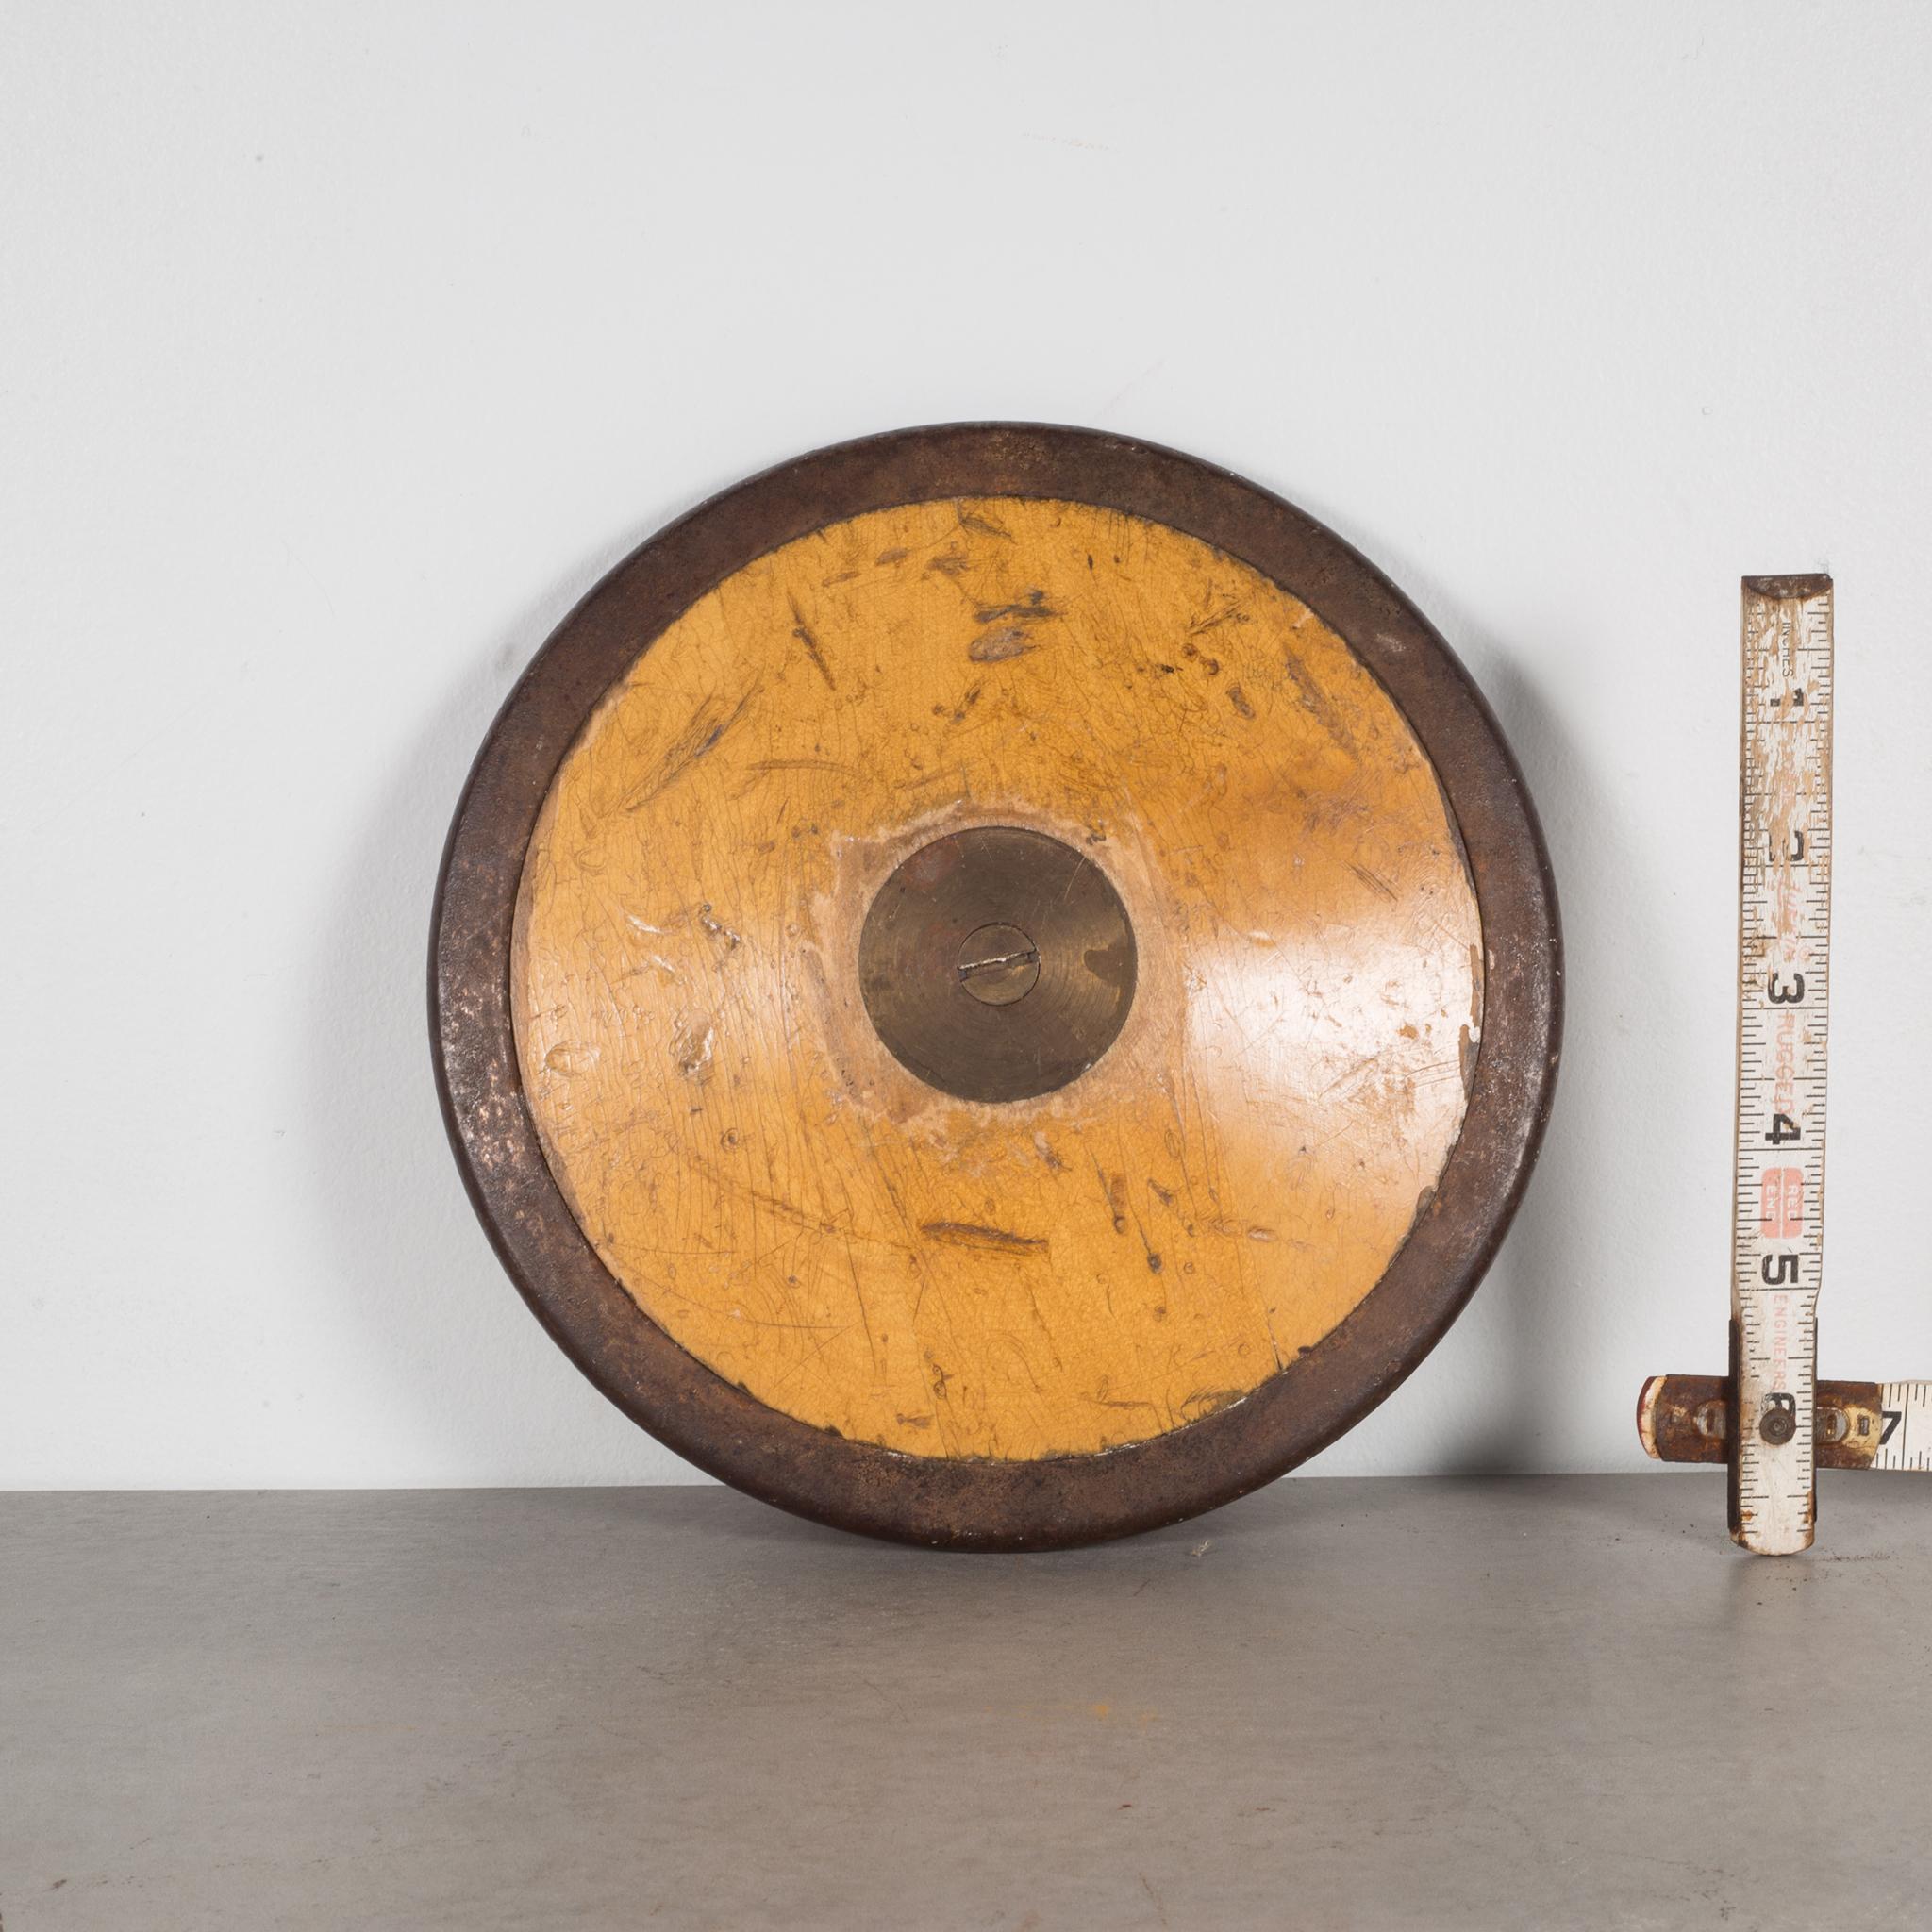 About

A wood discus with brass center and steel rim.

Creator: Unknown.
Date of manufacture: circa 1920s.
Materials and techniques: Wood, brass, steel.
Condition: Good. Wear consistent with age and use.
Dimensions: H 1.5 in. W 8.5 in. D 8.5